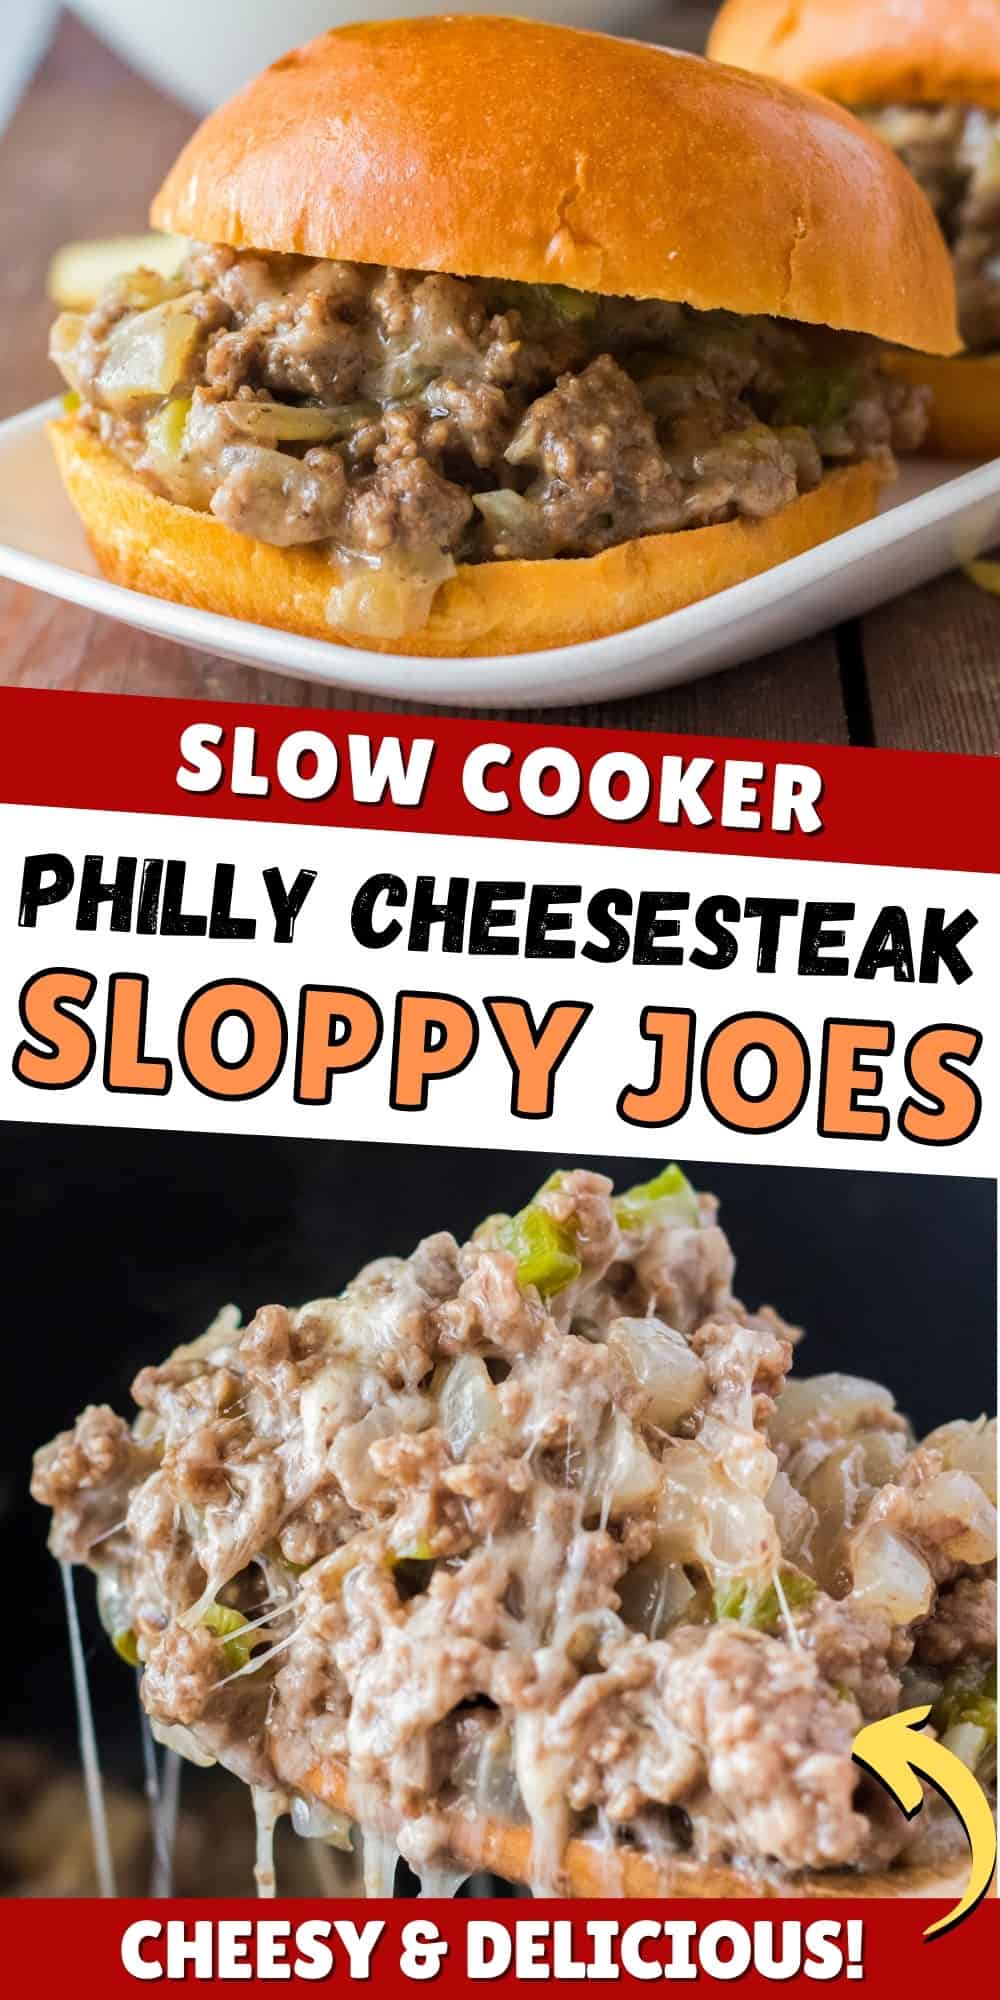 Slow cooker Philly Cheesesteak Sloppy Joes; Cheesy and delicious! Pinterest Image.